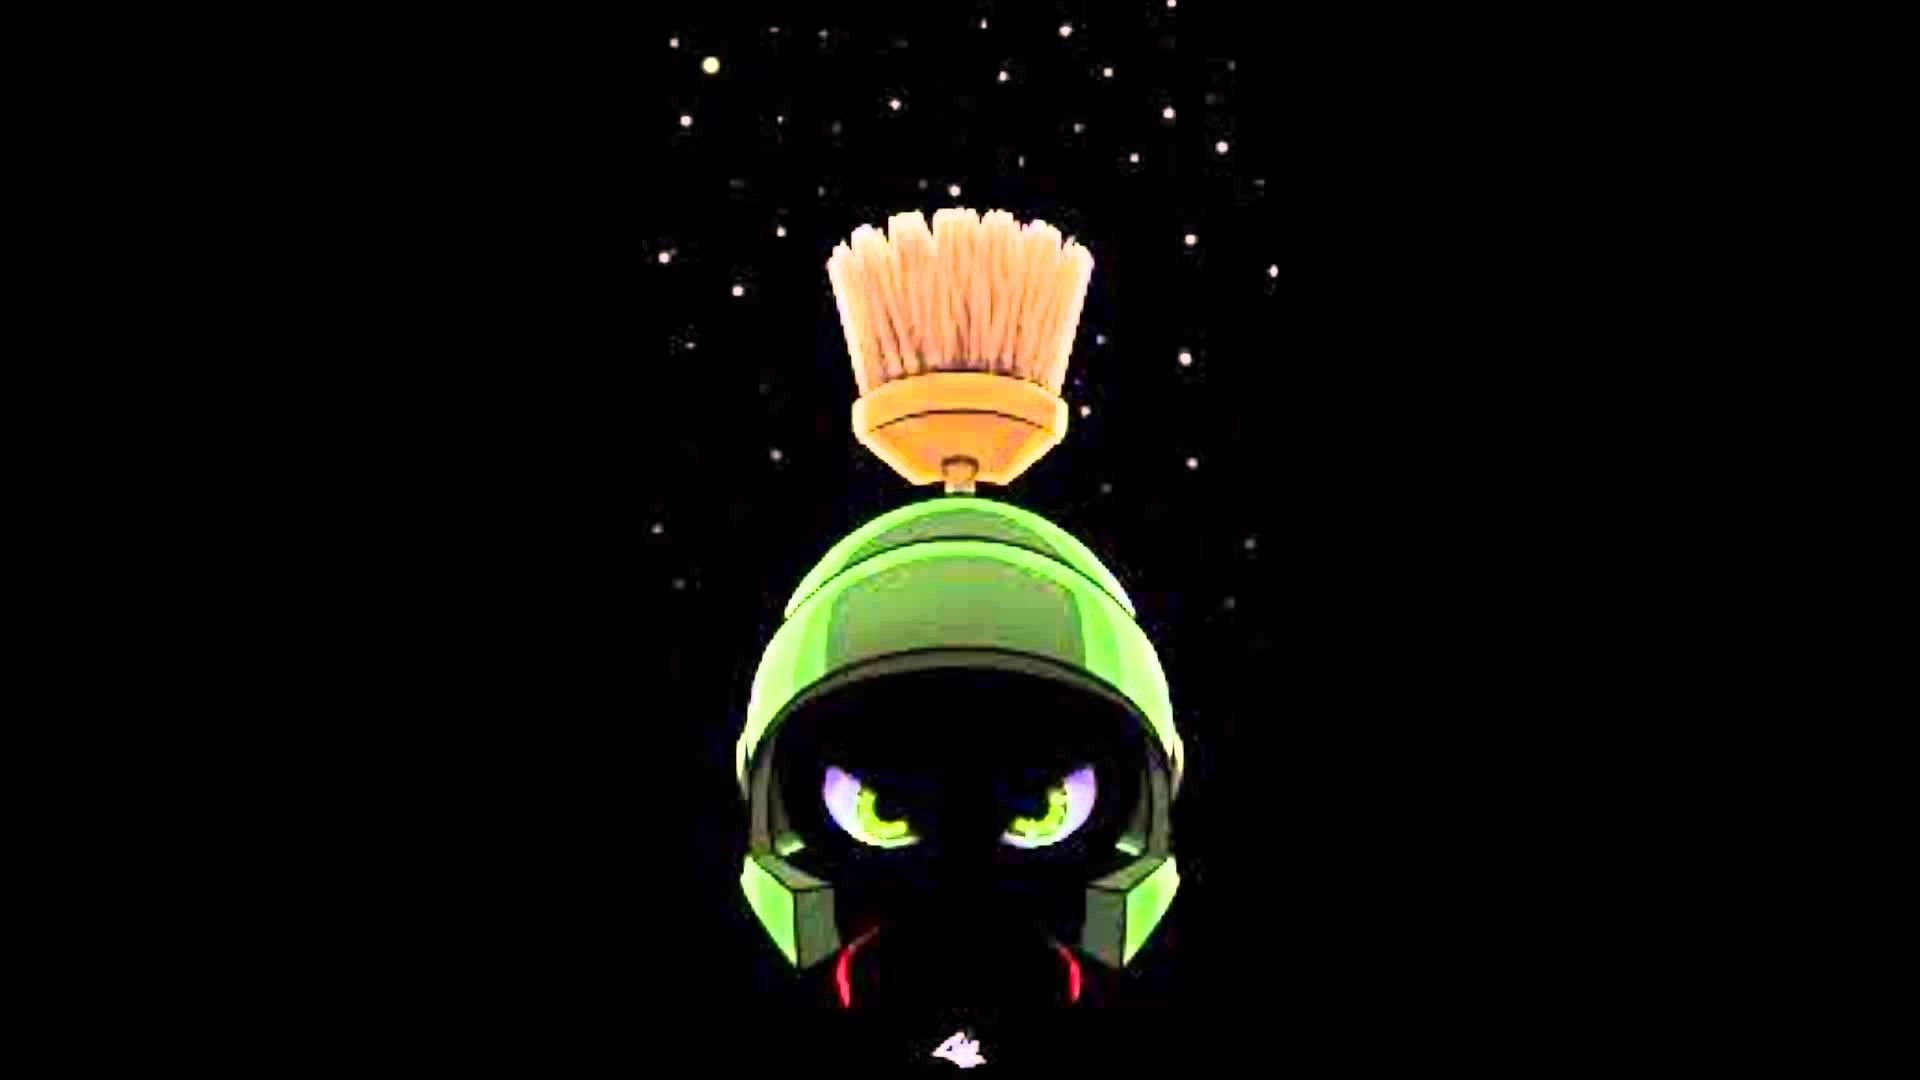 Cool Marvin the Martian